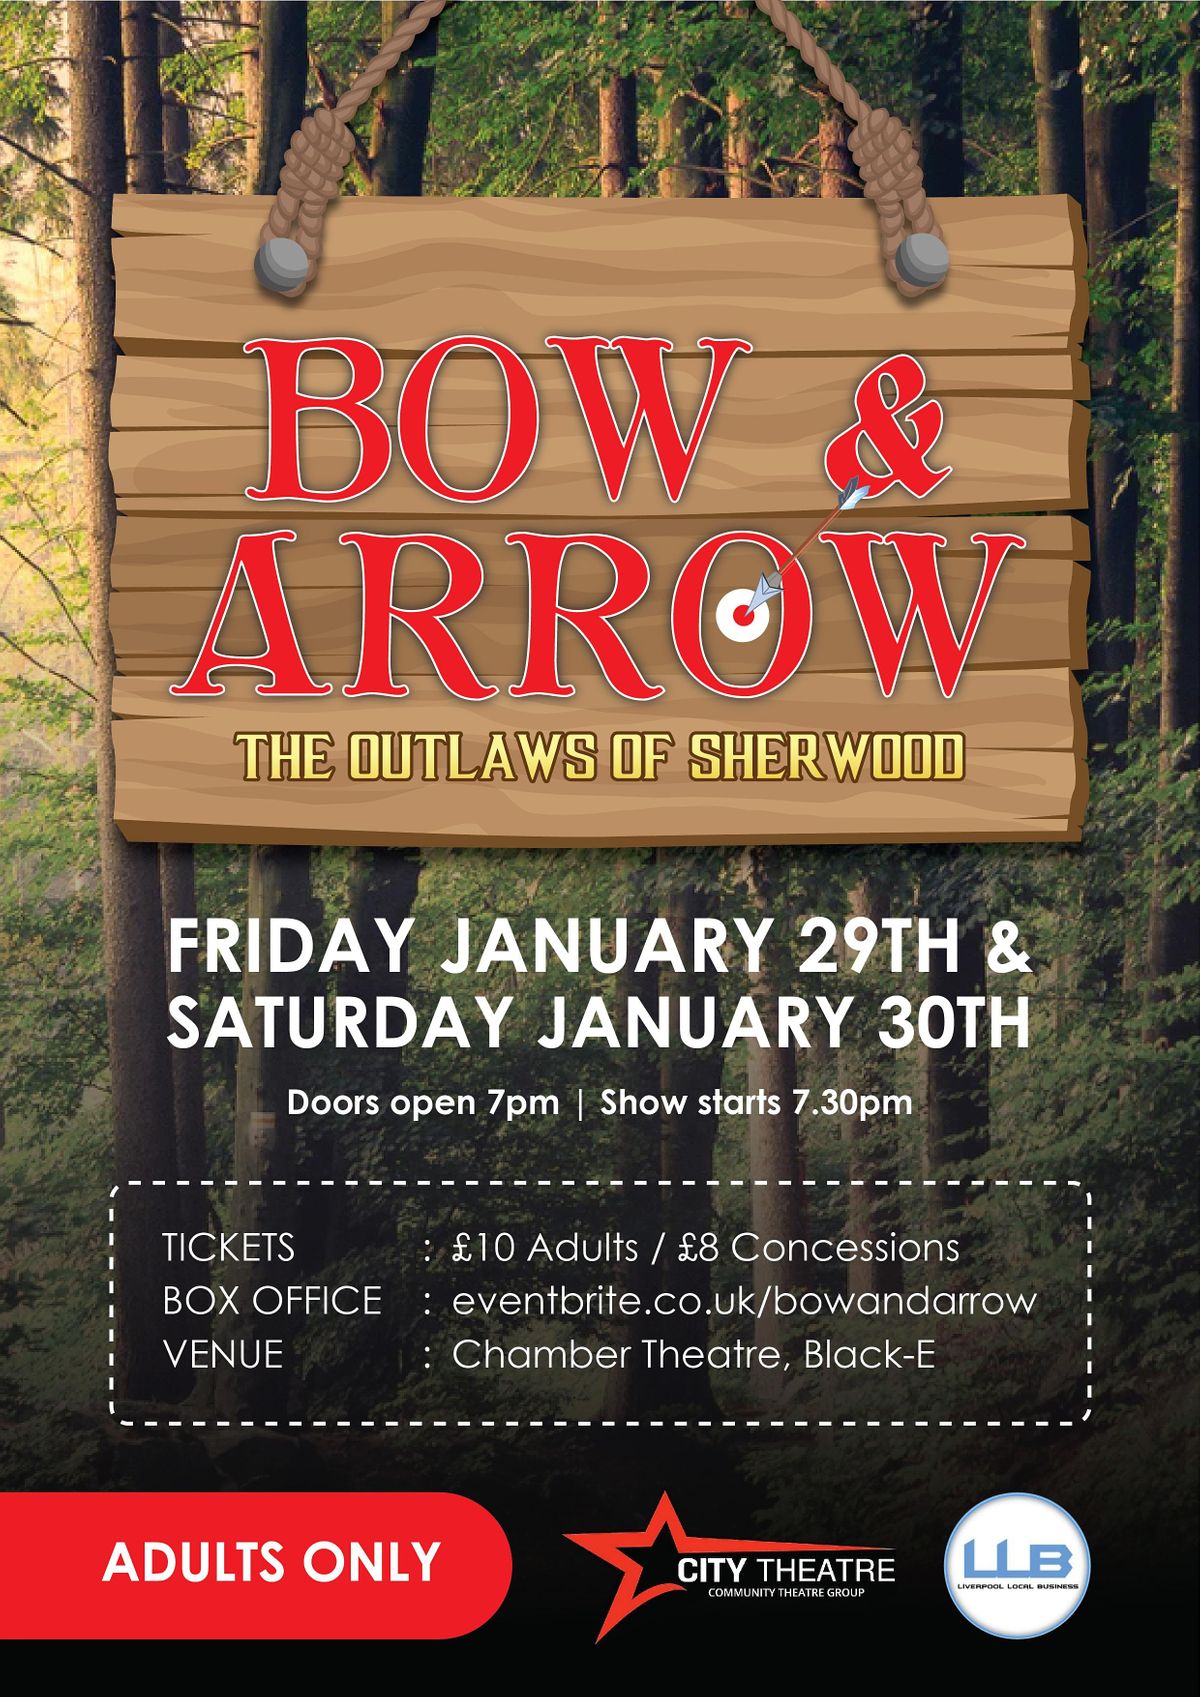 BOW & ARROW: The Outlaws of Sherwood